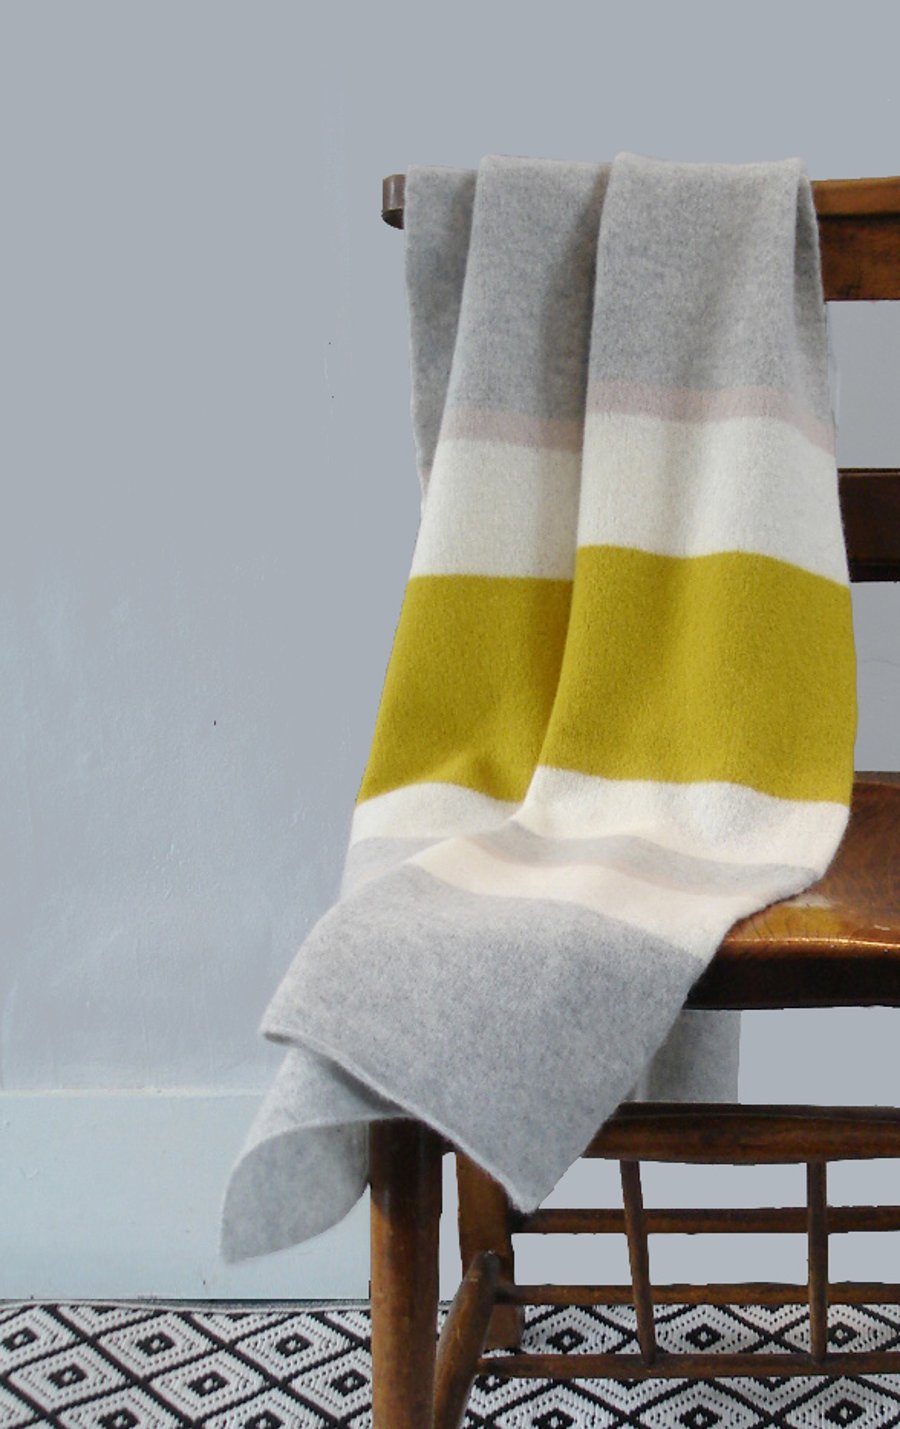 Throw blanket - runner - knitted in lambswool - yellow grey white putty stripe